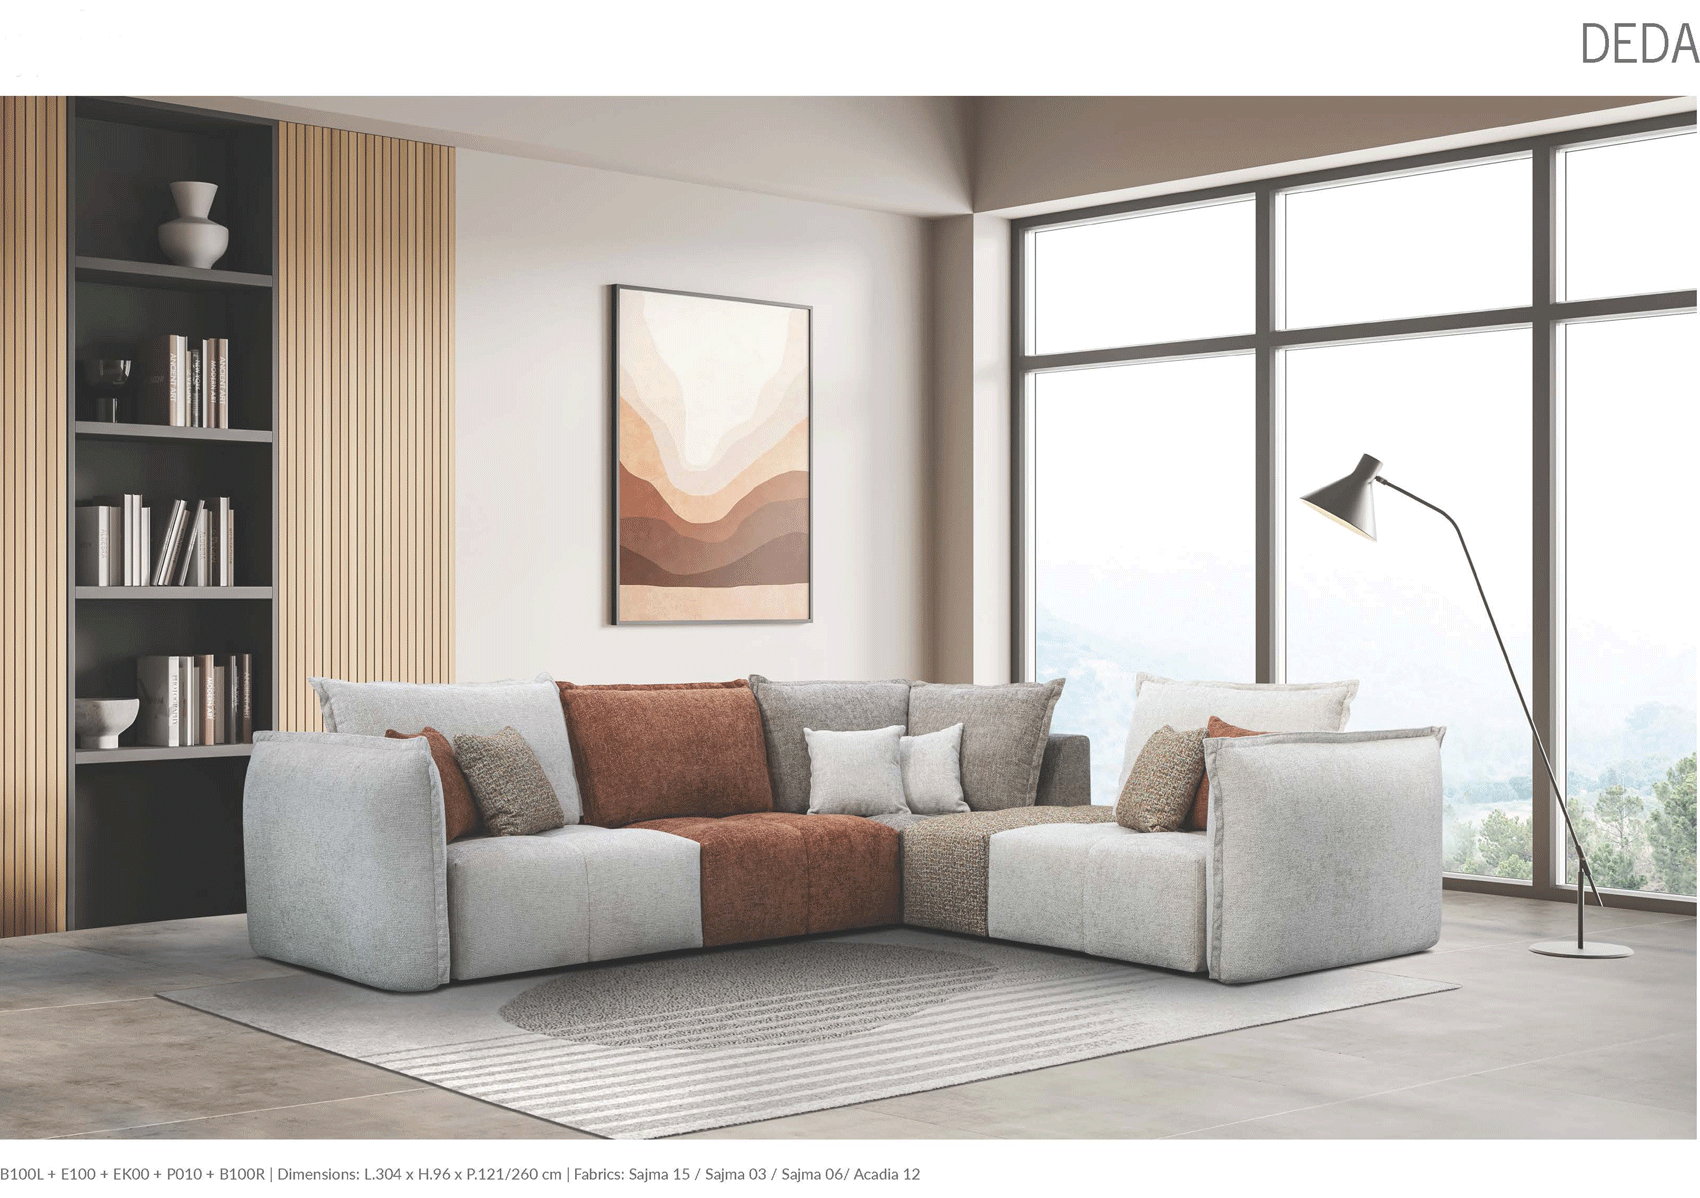 Living Room Furniture Coffee and End Tables Deda Sectional